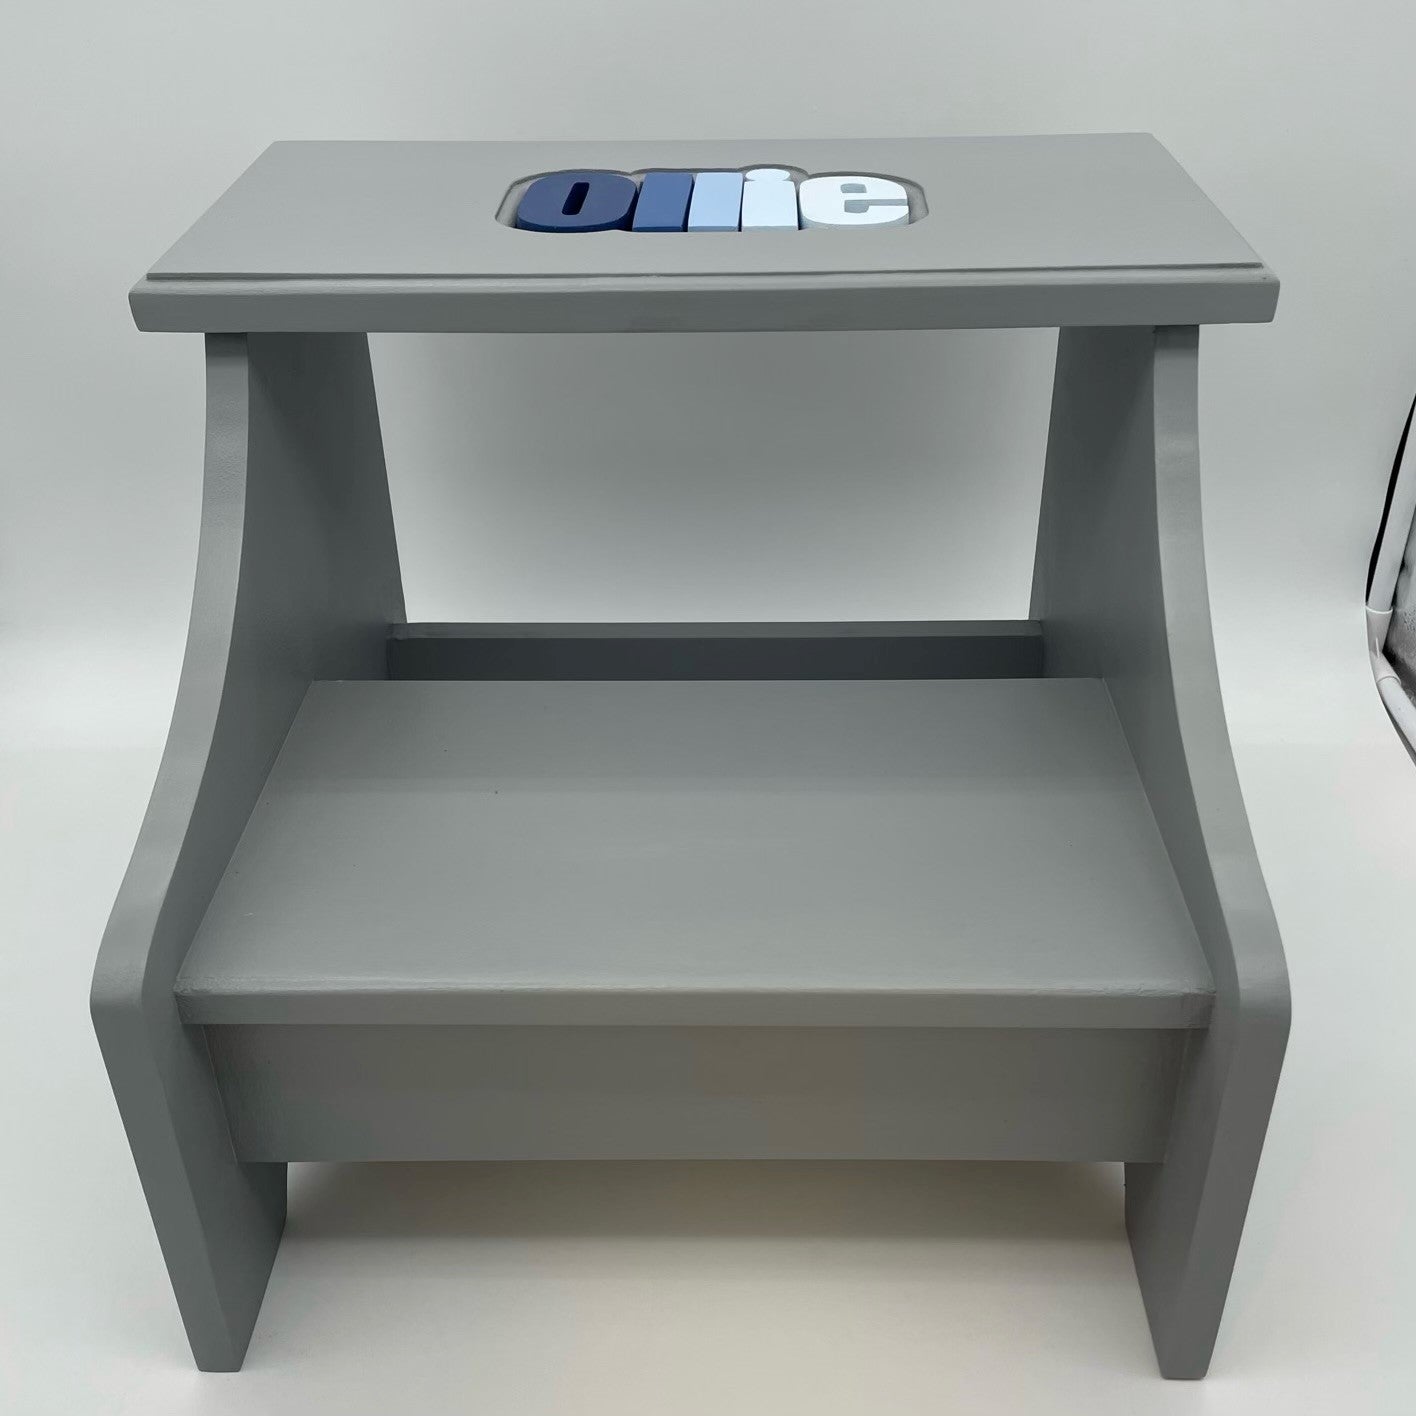 Load image into Gallery viewer, Personalized Puzzle Step Stool
